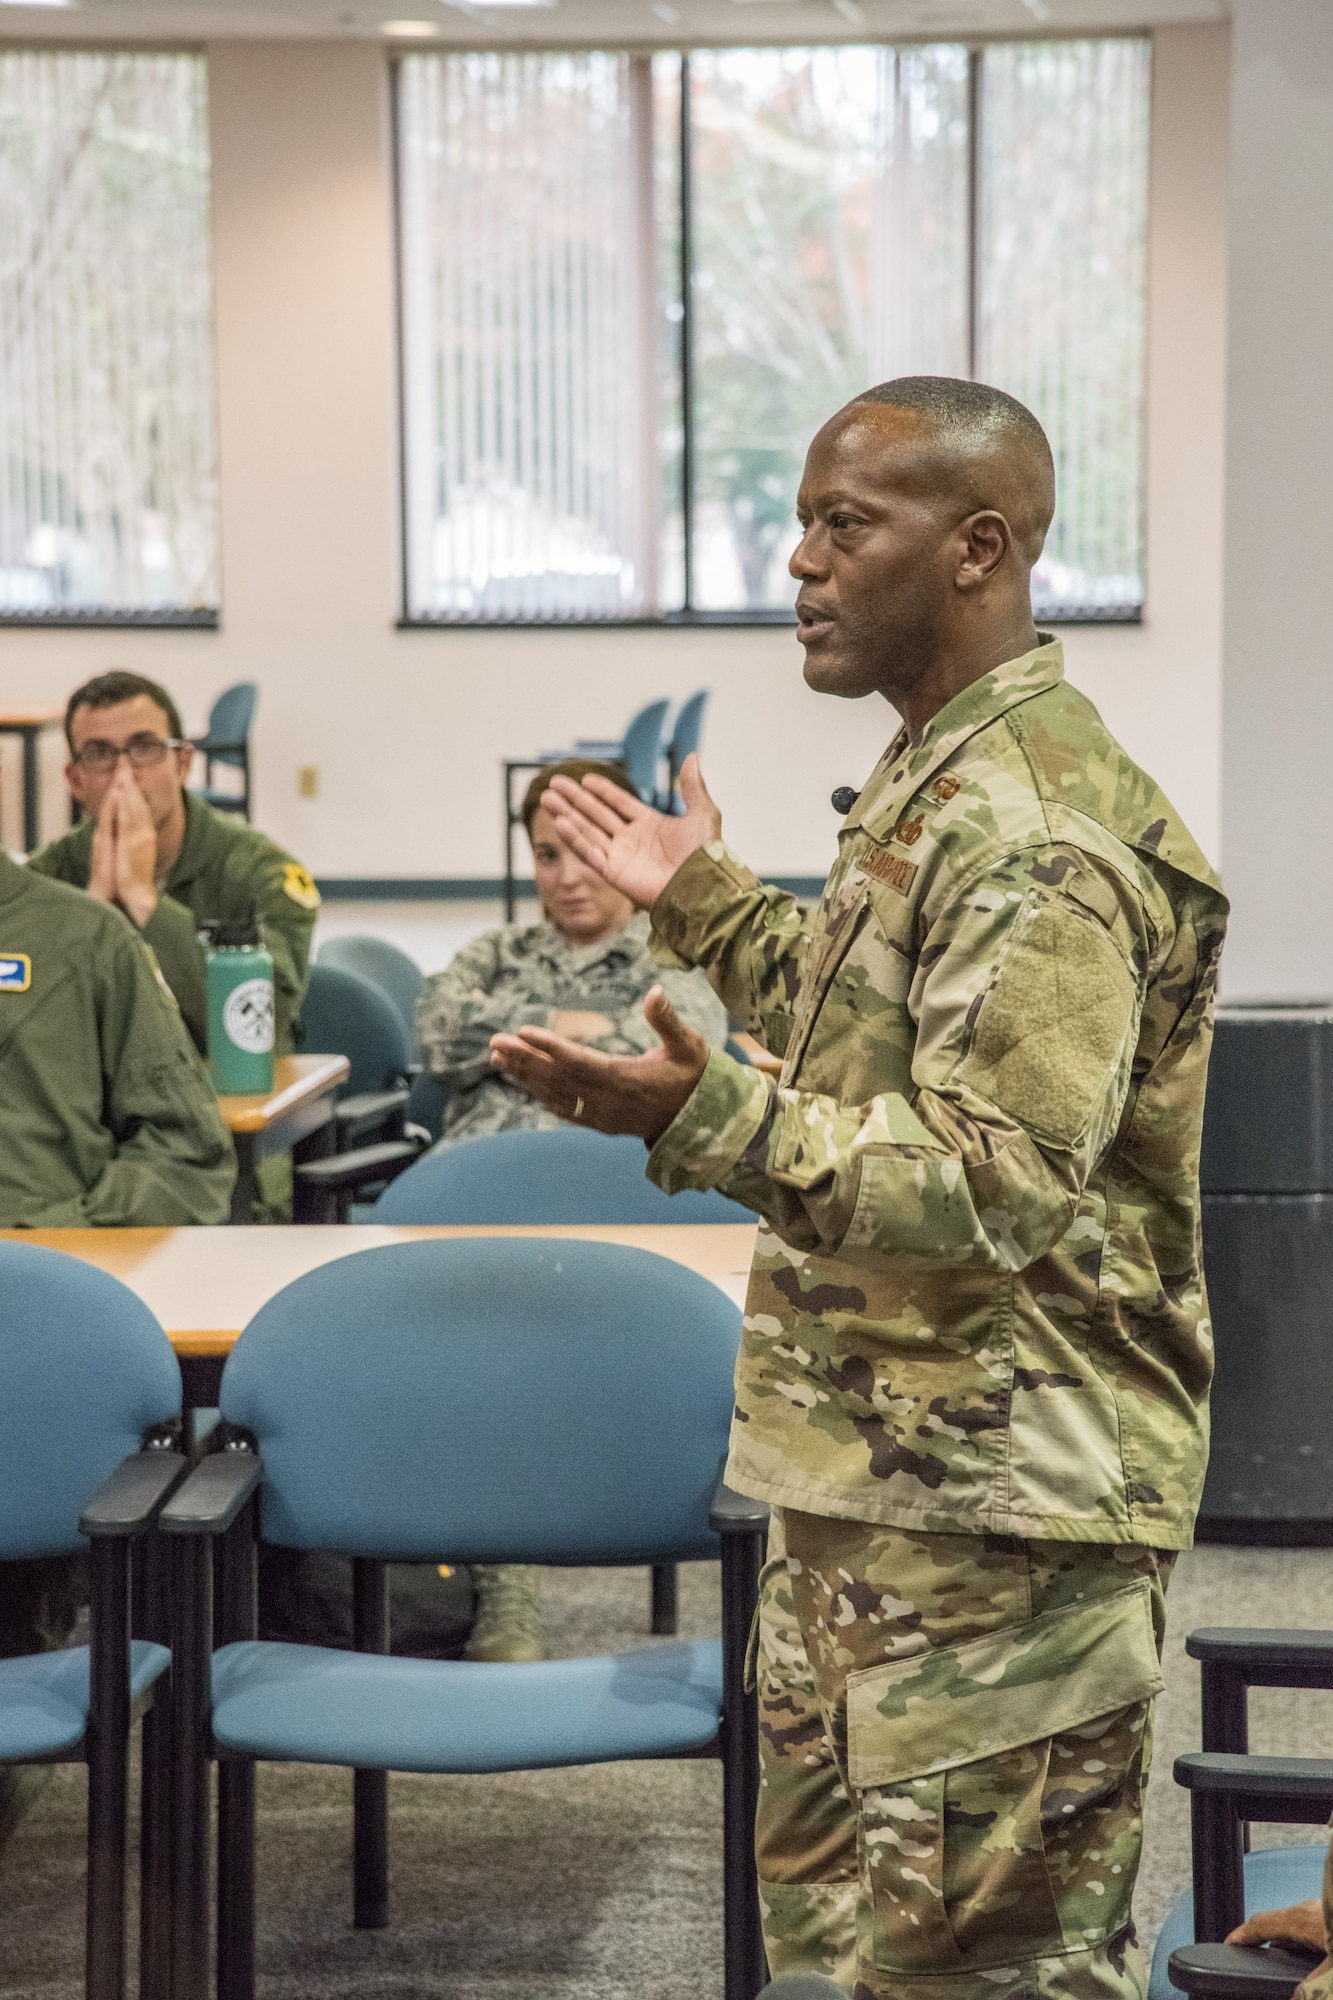 Brig. Gen. Ronald Jolly Sr., commander of the 82nd Training Wing, Sheppard Air Force Base, Texas, engages with students attending a panel discussion on ‘Leading the Air Force Family’ during a Leader Development Course for Squadron Command session, Nov. 5, 2018, at Air University, Maxwell Air Force Base, Alabama. Along with Jolly, the panel consisted of a wing command chief, squadron commander and first sergeant. (U.S. Air Force photo by William Birchfield)